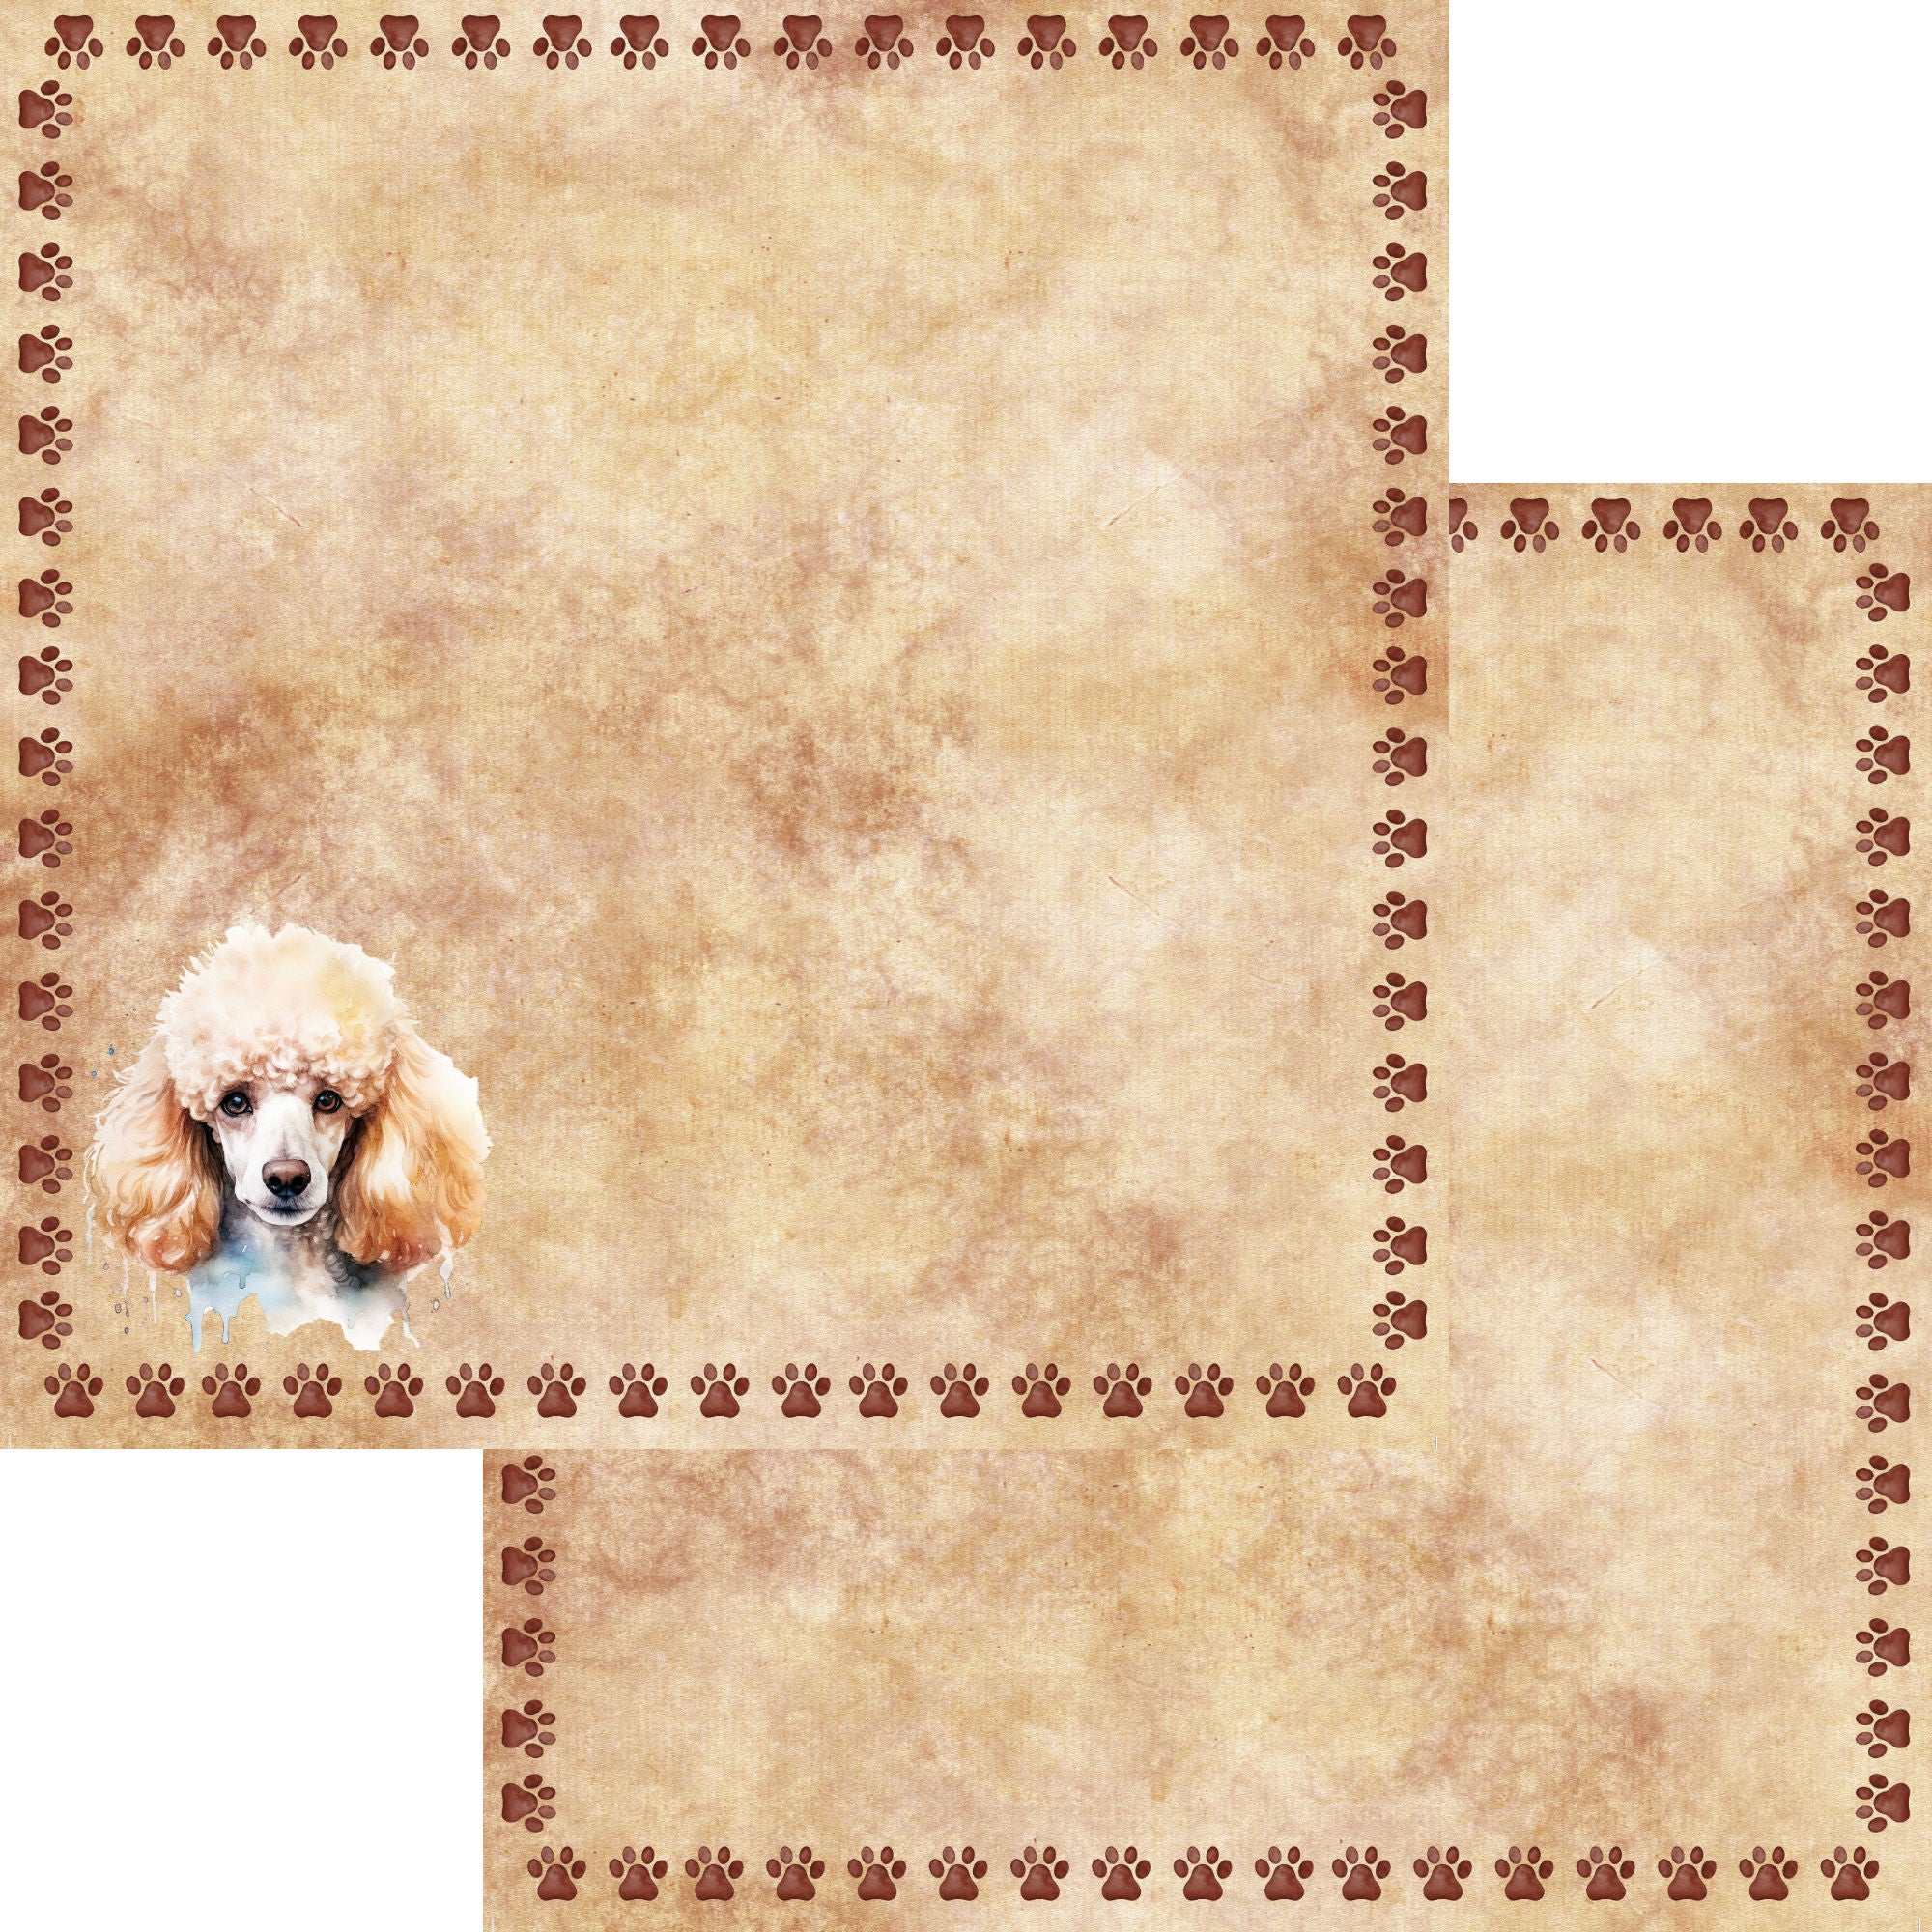 Dog Breeds Collection Poodle 12 x 12 Double-Sided Scrapbook Paper by SSC Designs